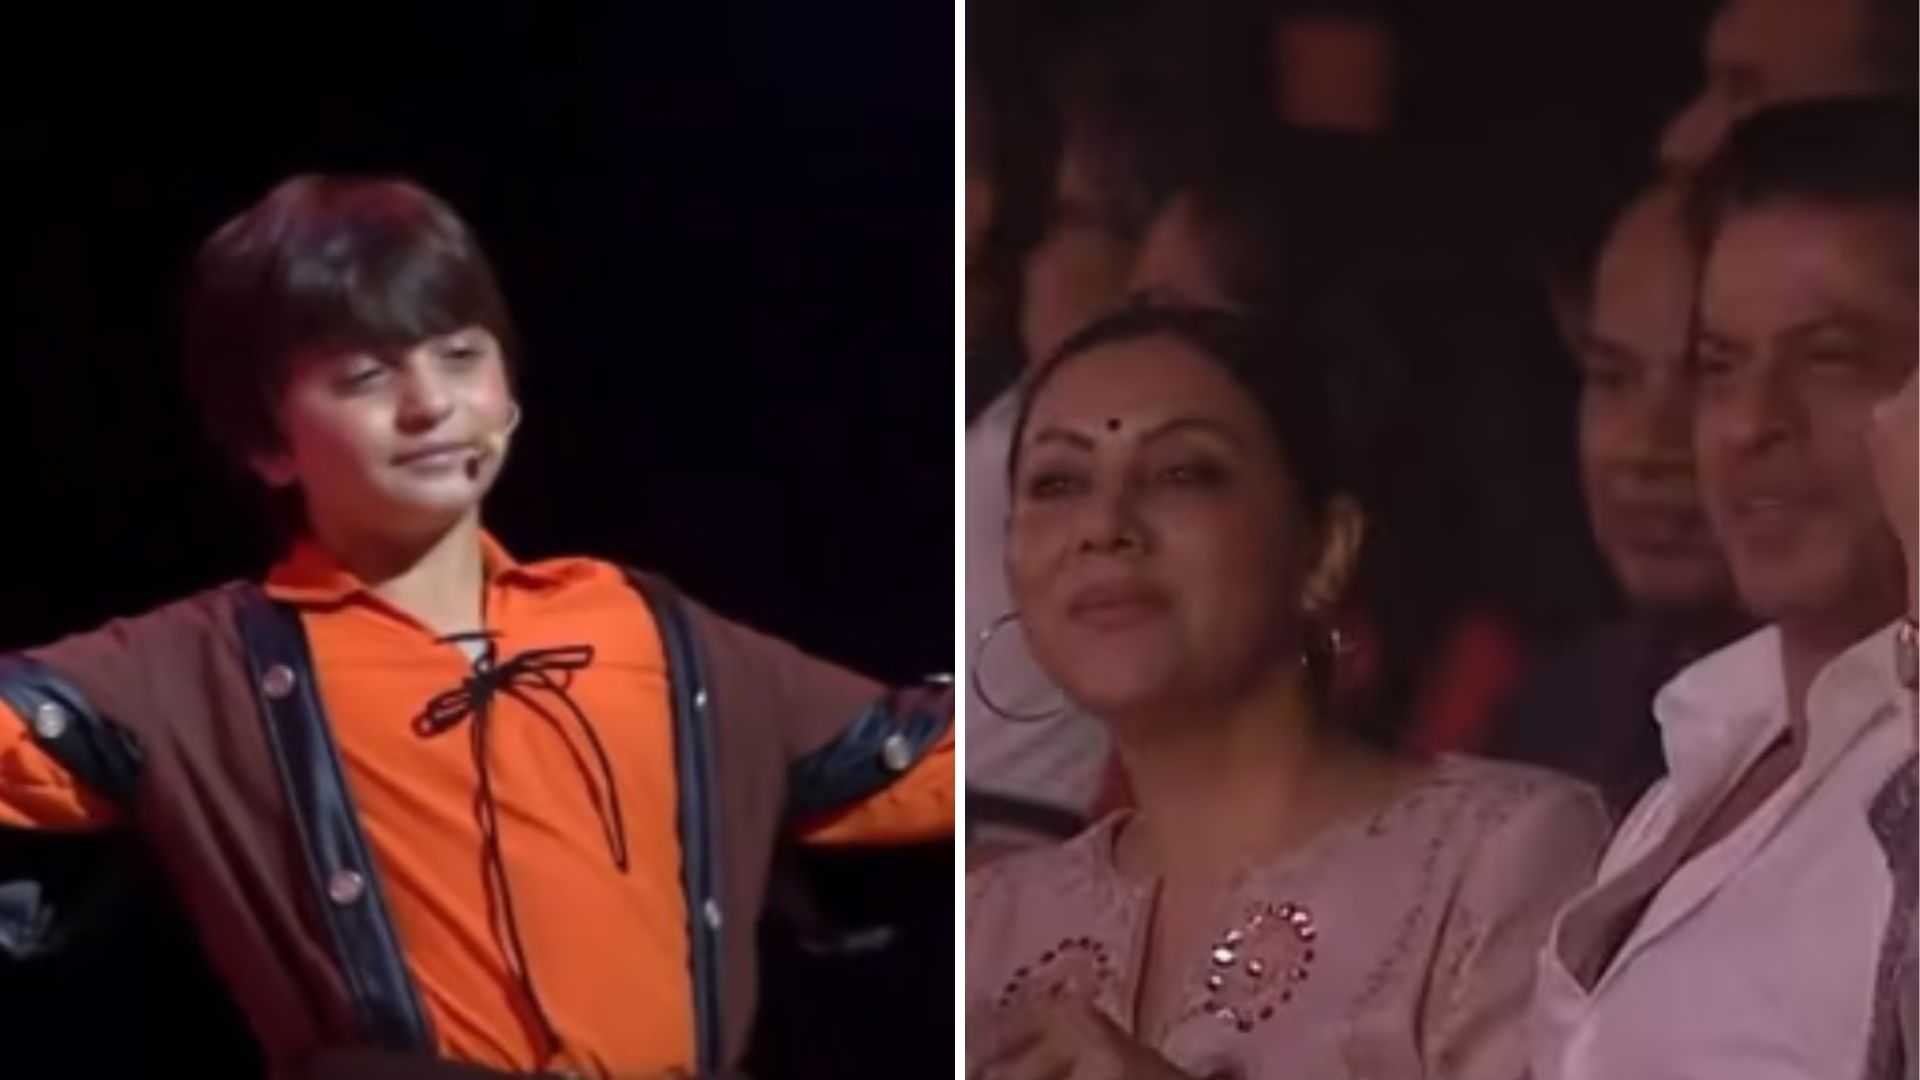 Shah Rukh Khan's son AbRam delightfully pulls off his dad's signature pose in a school play, watch